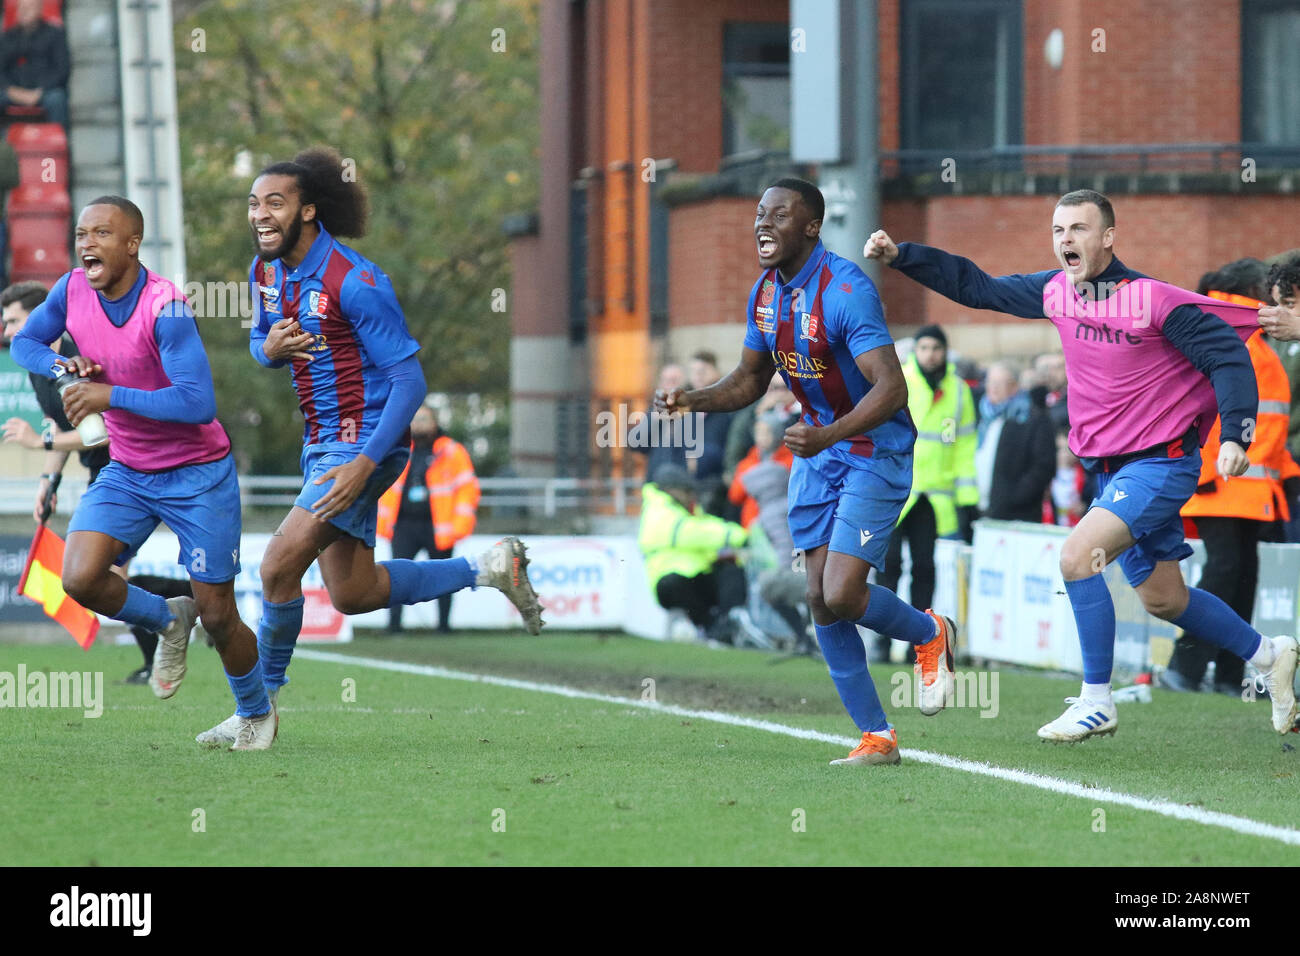 London, UK. 10th Nov, 2019. LONDON UNITED KINGDOM. NOVEMBER 10 The Maldon and Tiptree bench celebrate their win during The FA Cup First Round between Leyton Orient and Maldon and Tiptree at Brisbane Road, London, England on 10 November 2019 Credit: Action Foto Sport/Alamy Live News Stock Photo